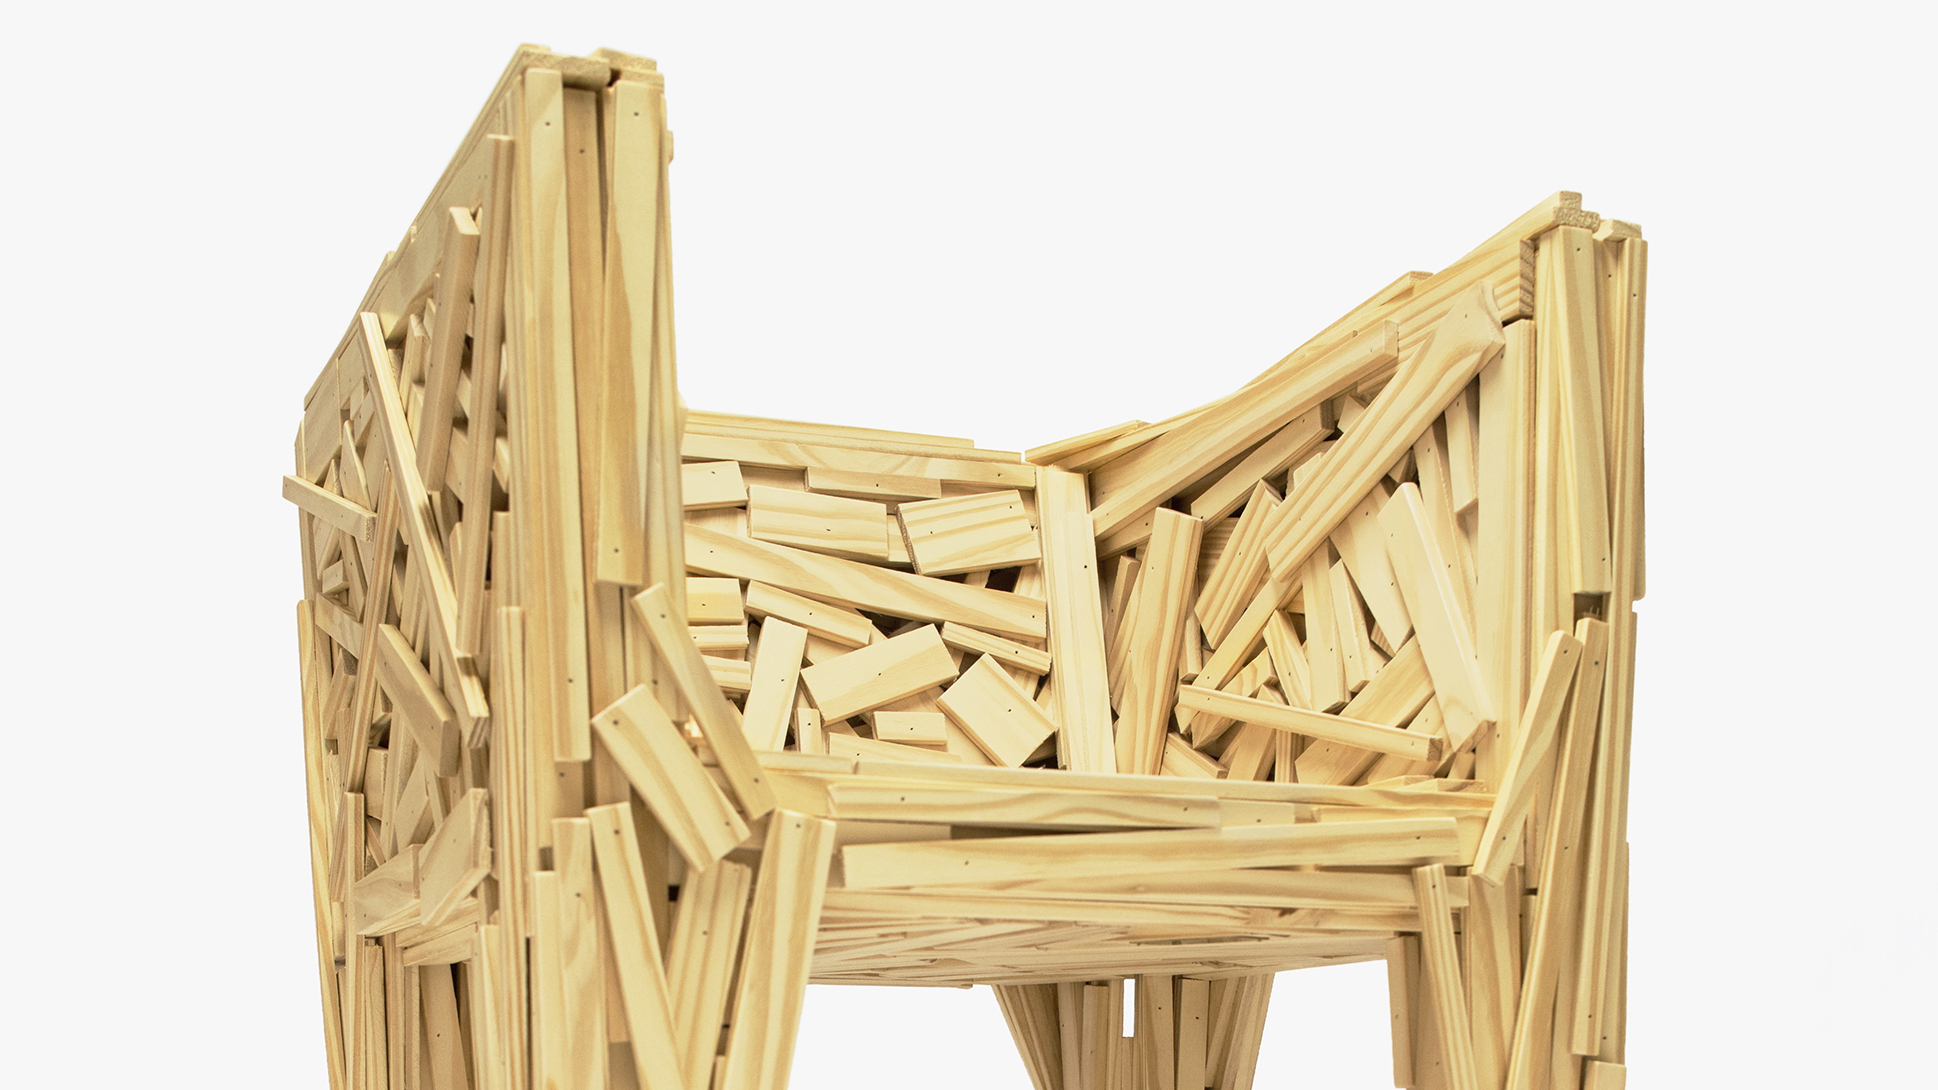 Favela chair by Campana brothers